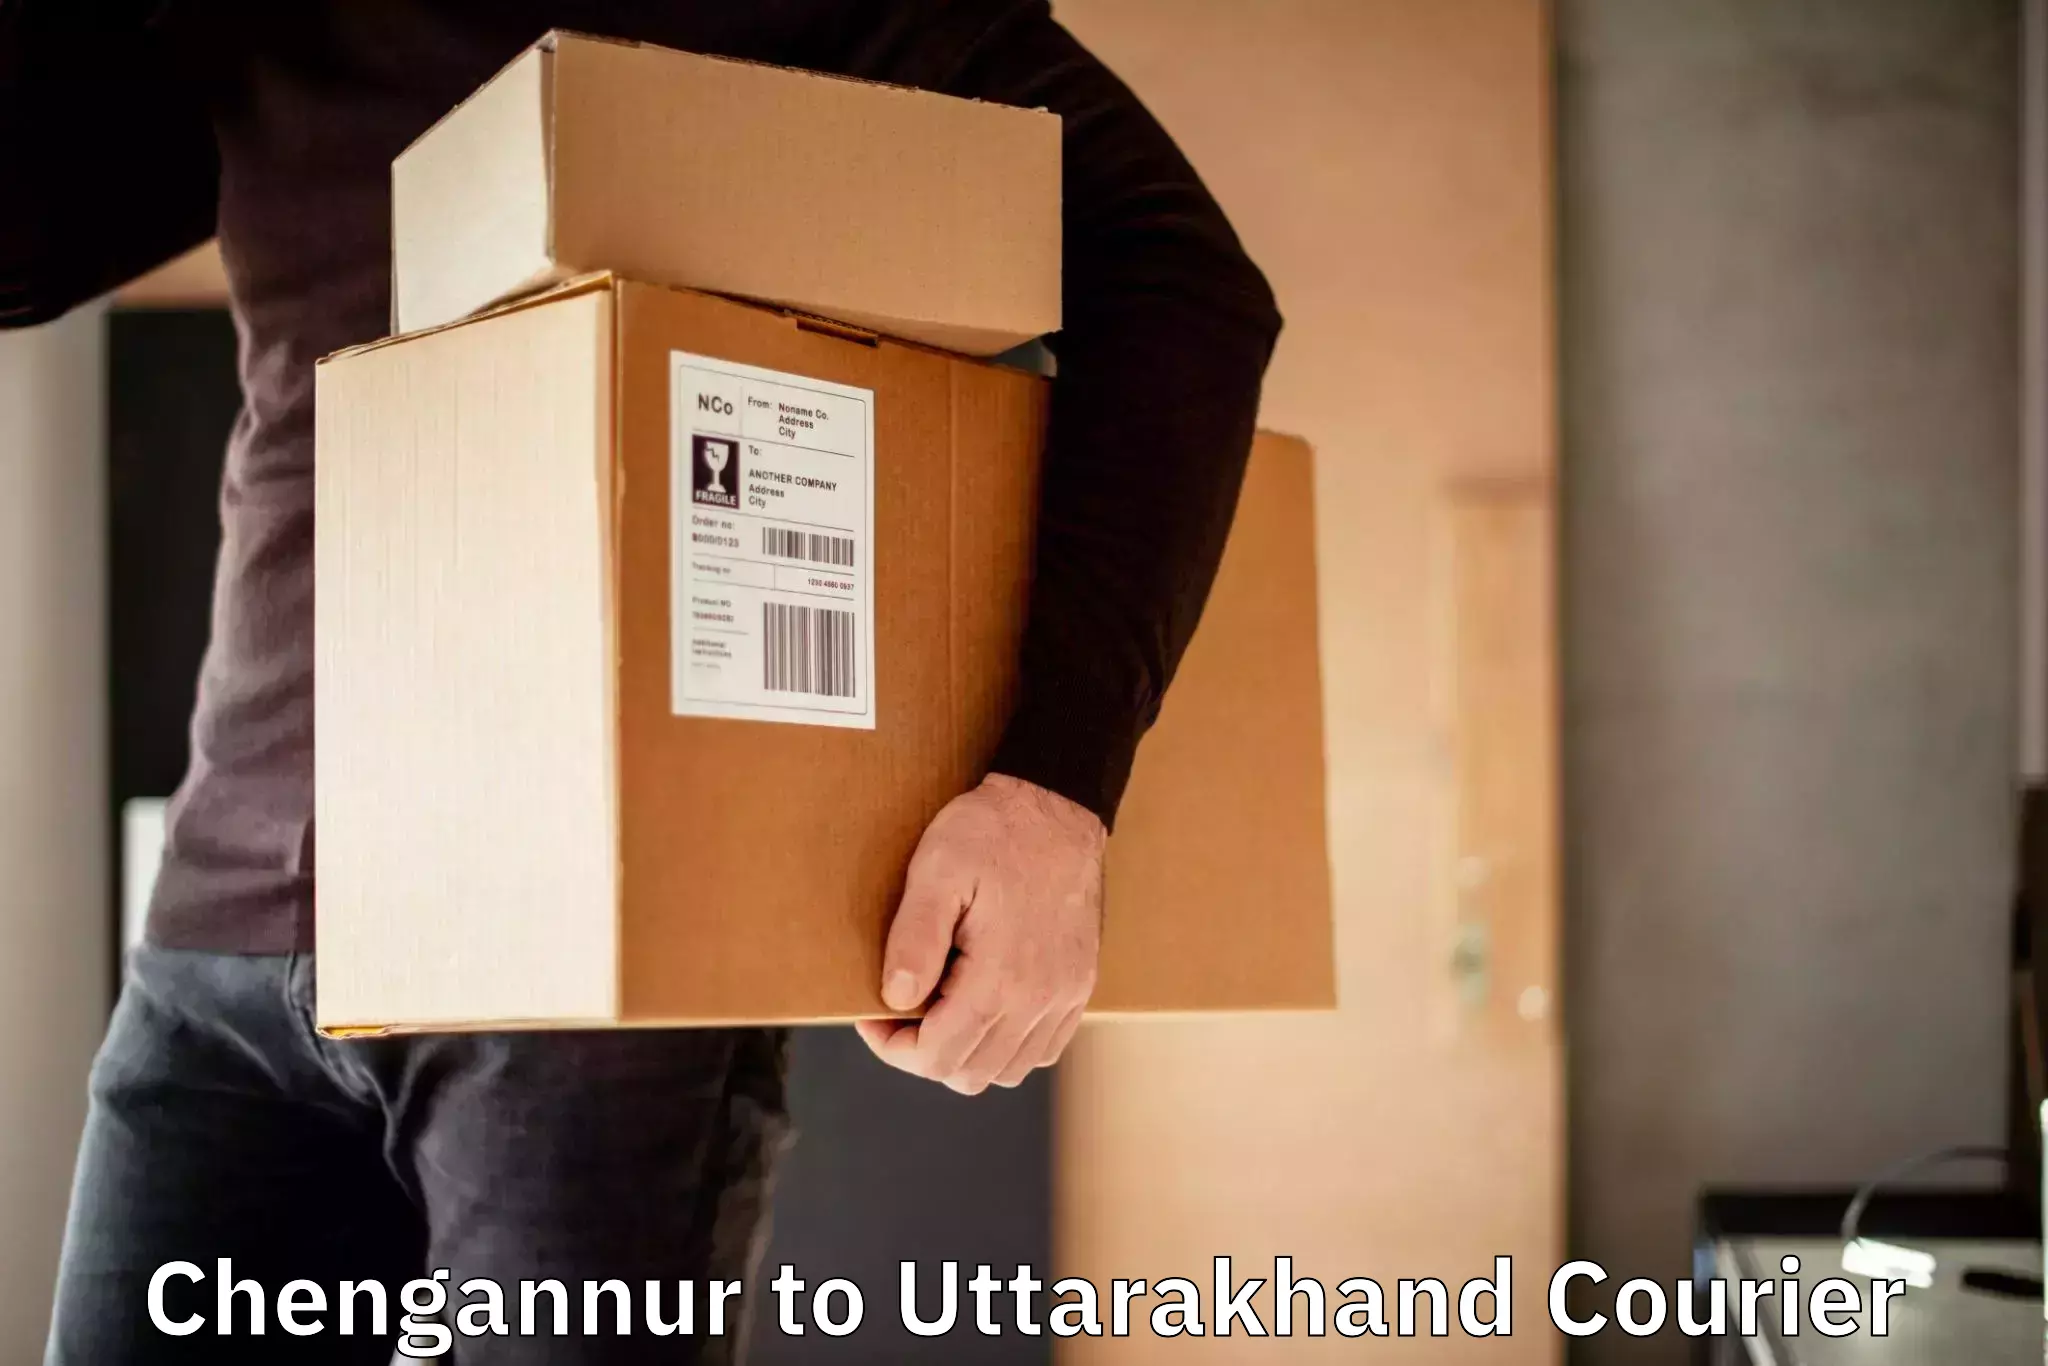 Multi-national courier services Chengannur to Haldwani